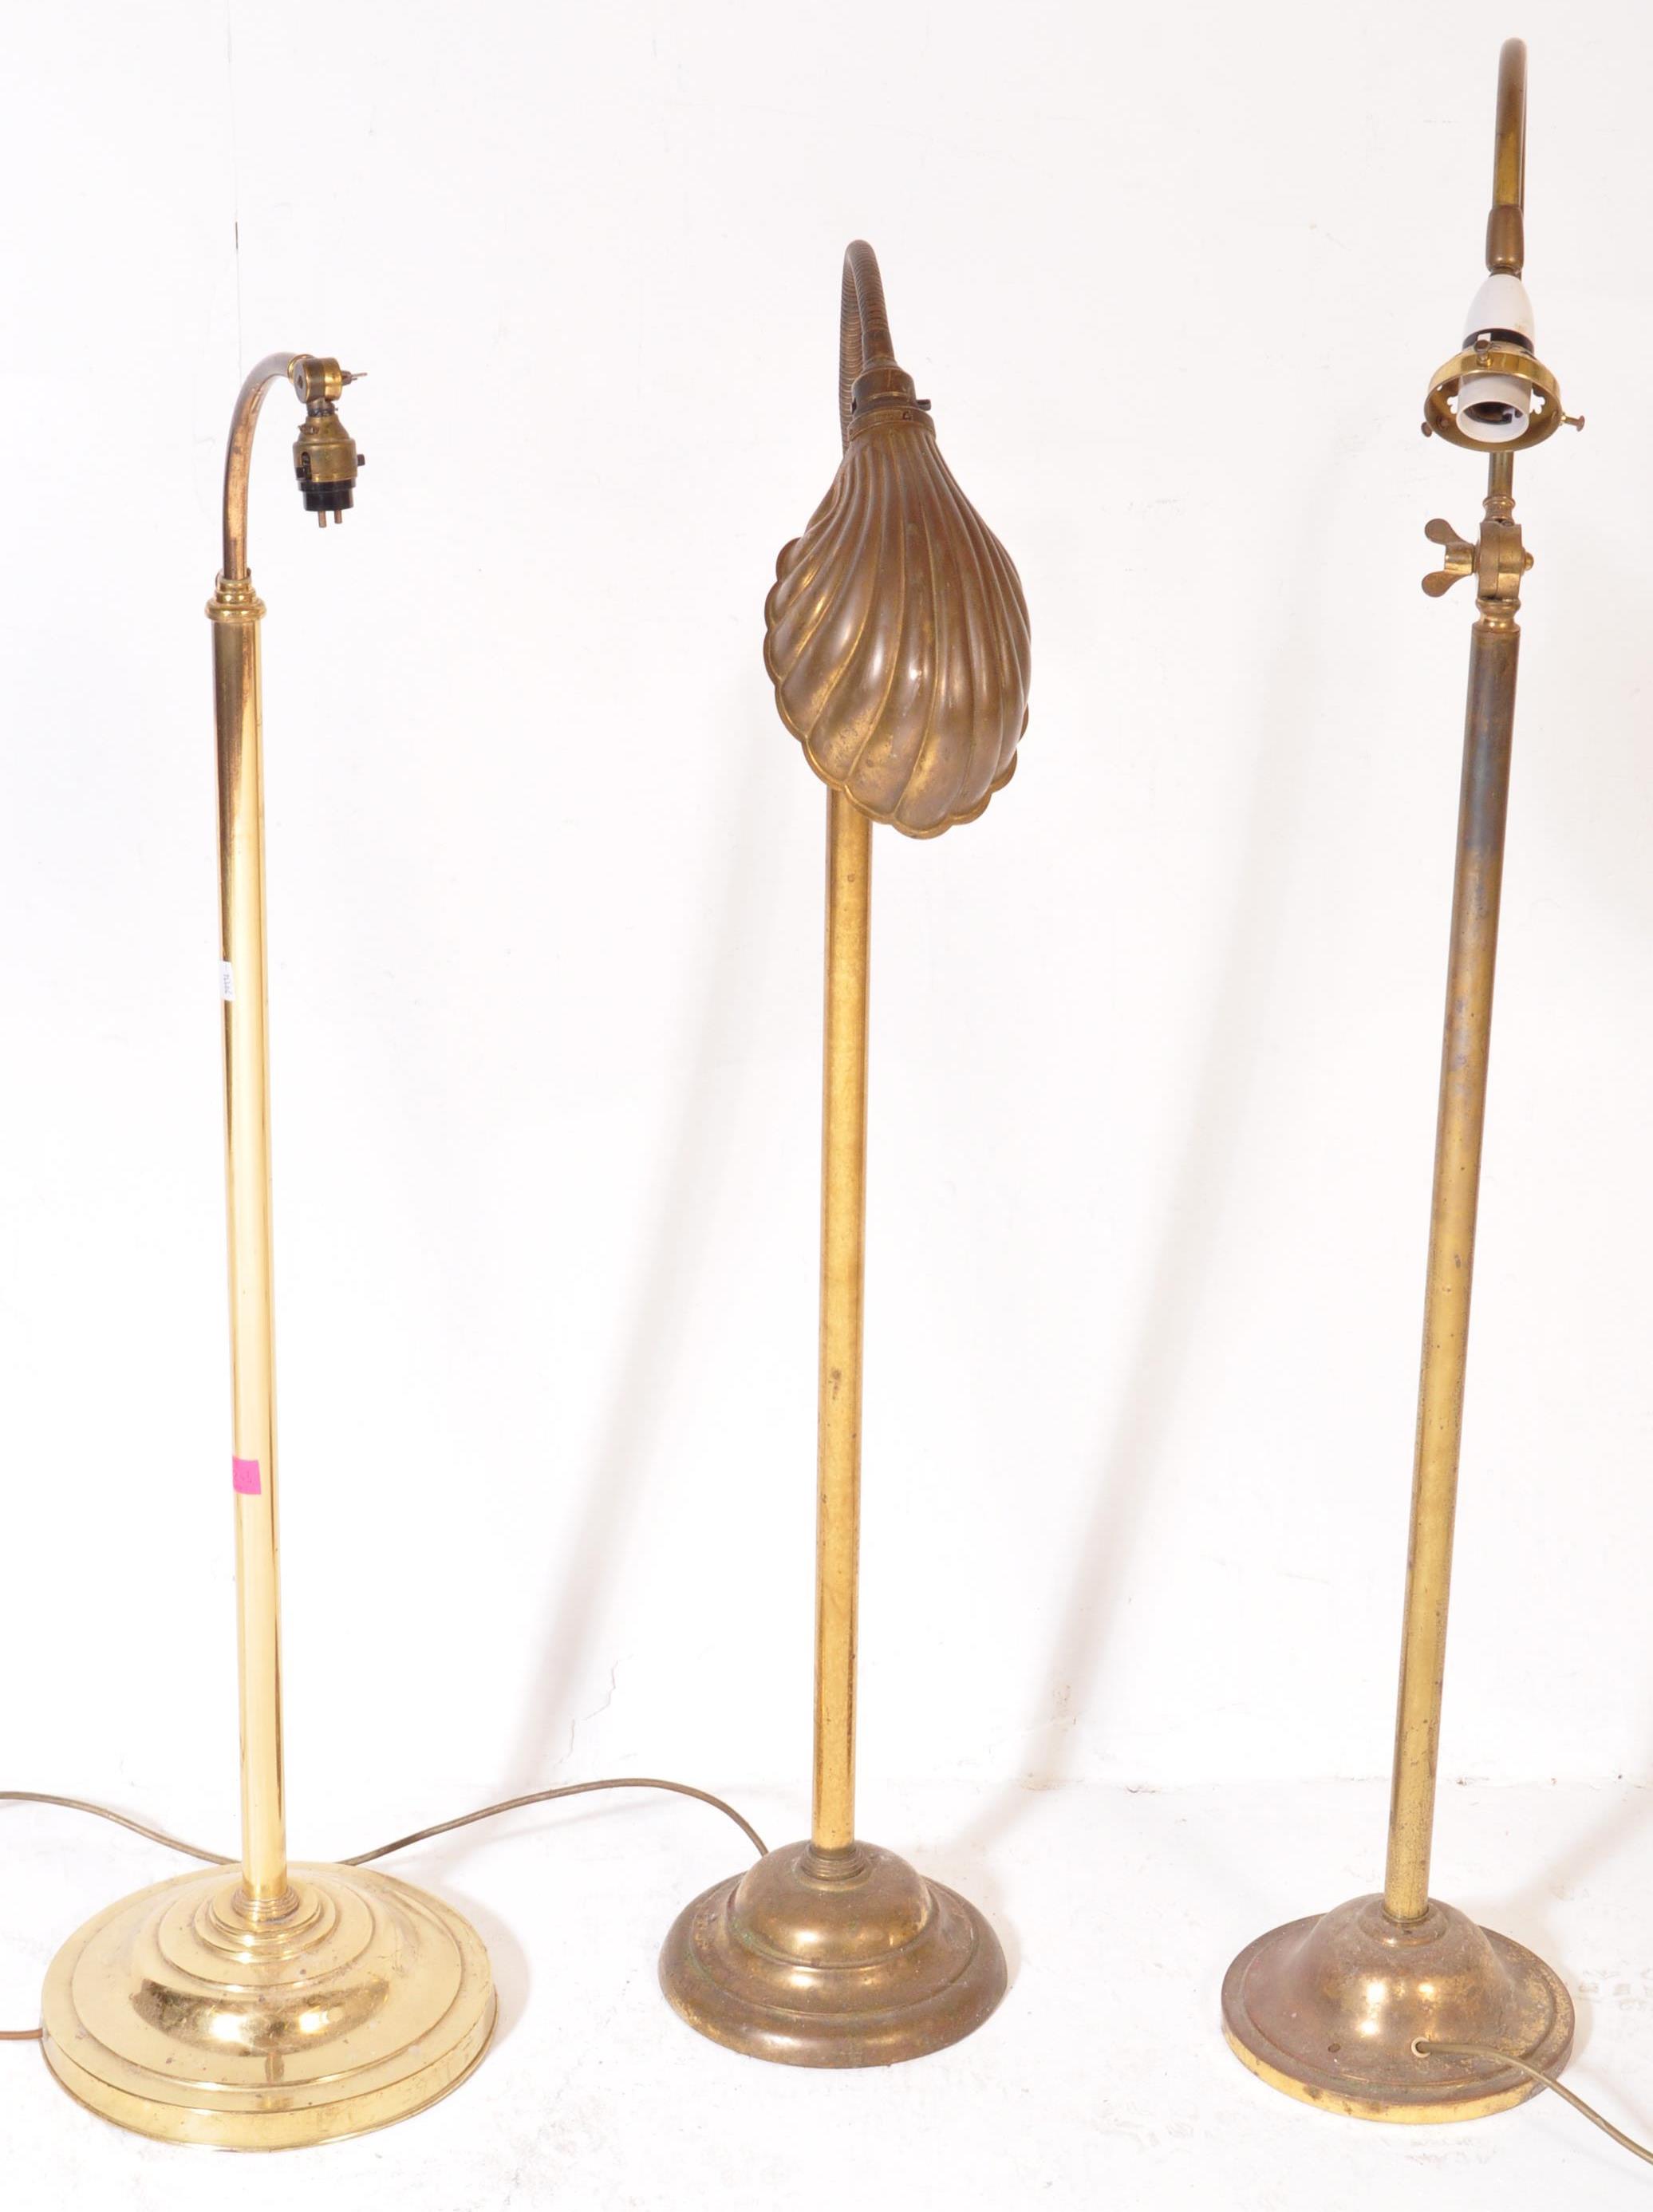 COLLECTION OF 20TH CENTURY BRASS STANDARD STANDING LAMPS - Image 2 of 5